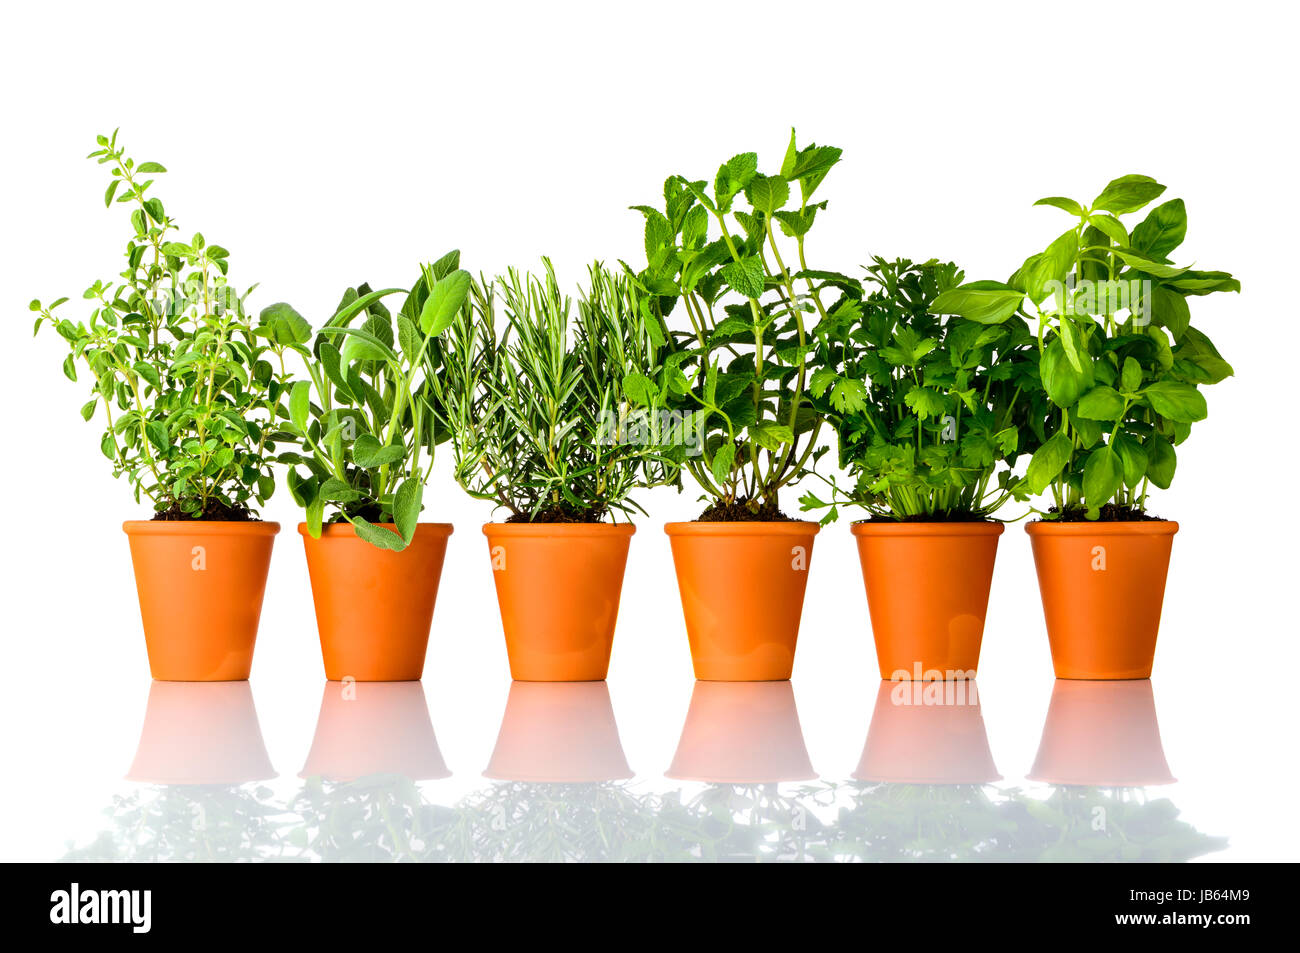 Different Culinary Herbs Growing in Pottery Pots on White Background. Oregano, Sage, Rosemary, mint, Parsley and Basil, each in separate Pot Stock Photo